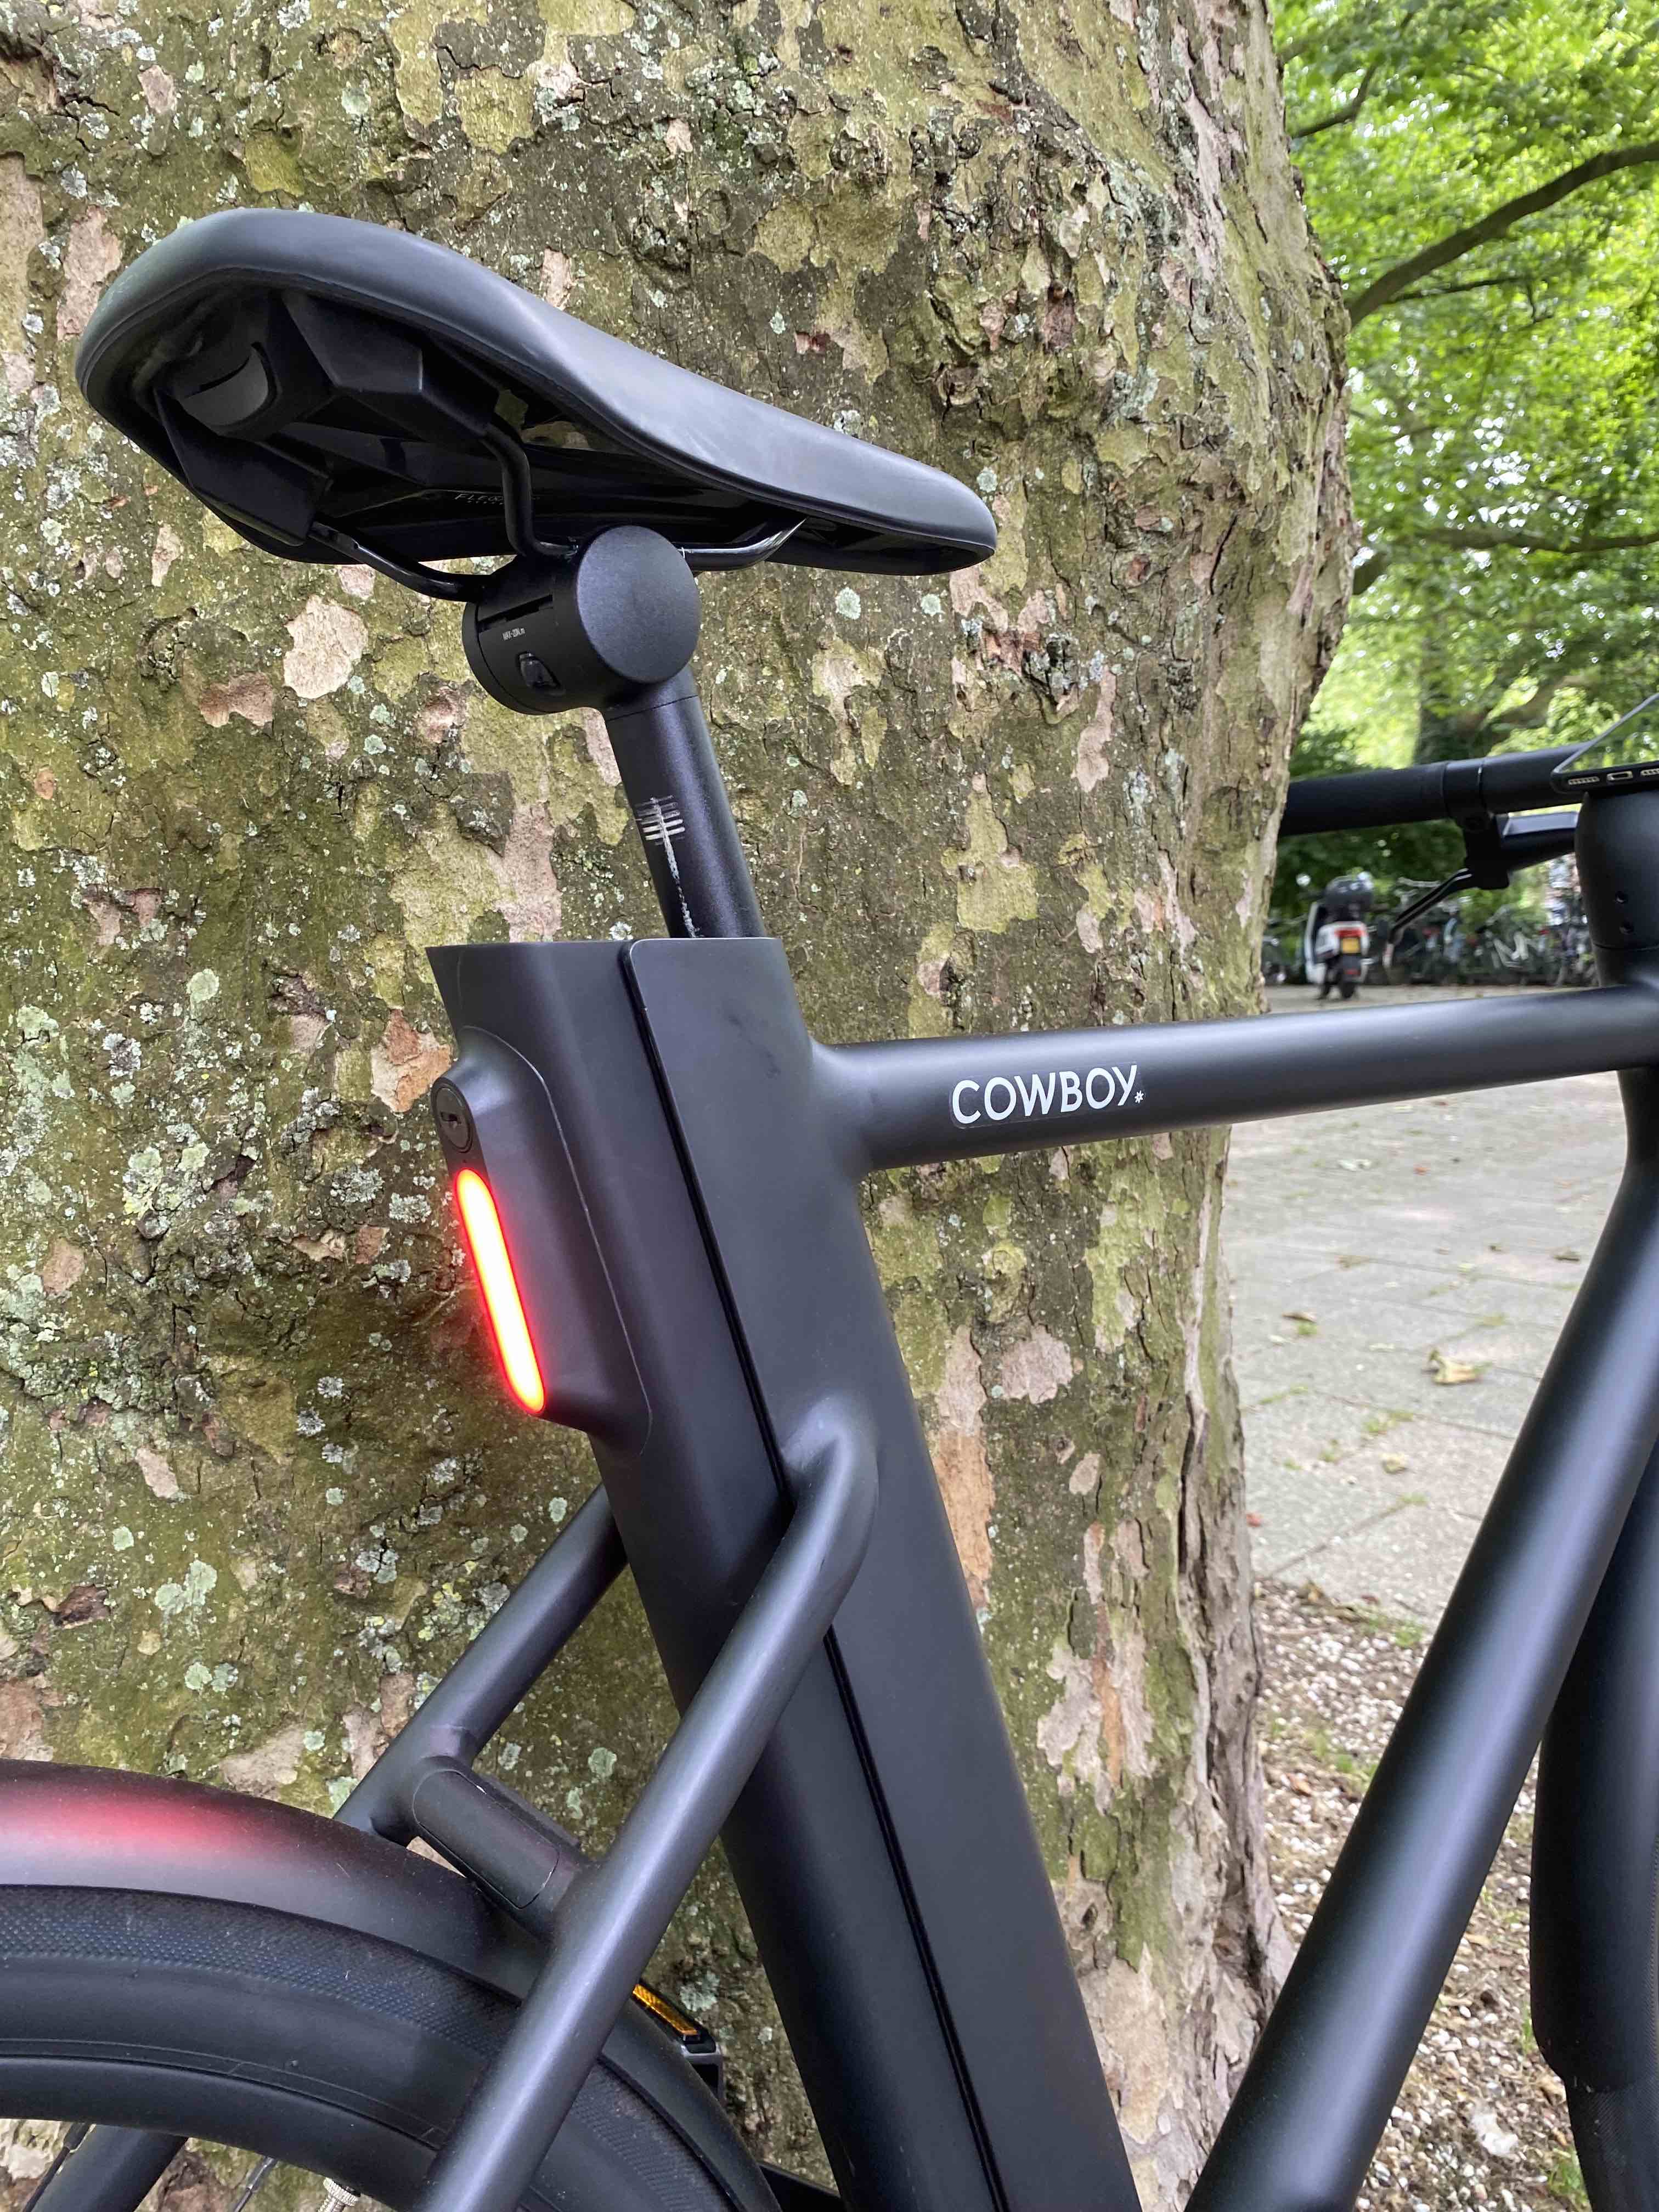 battery location on the cowboy ebike